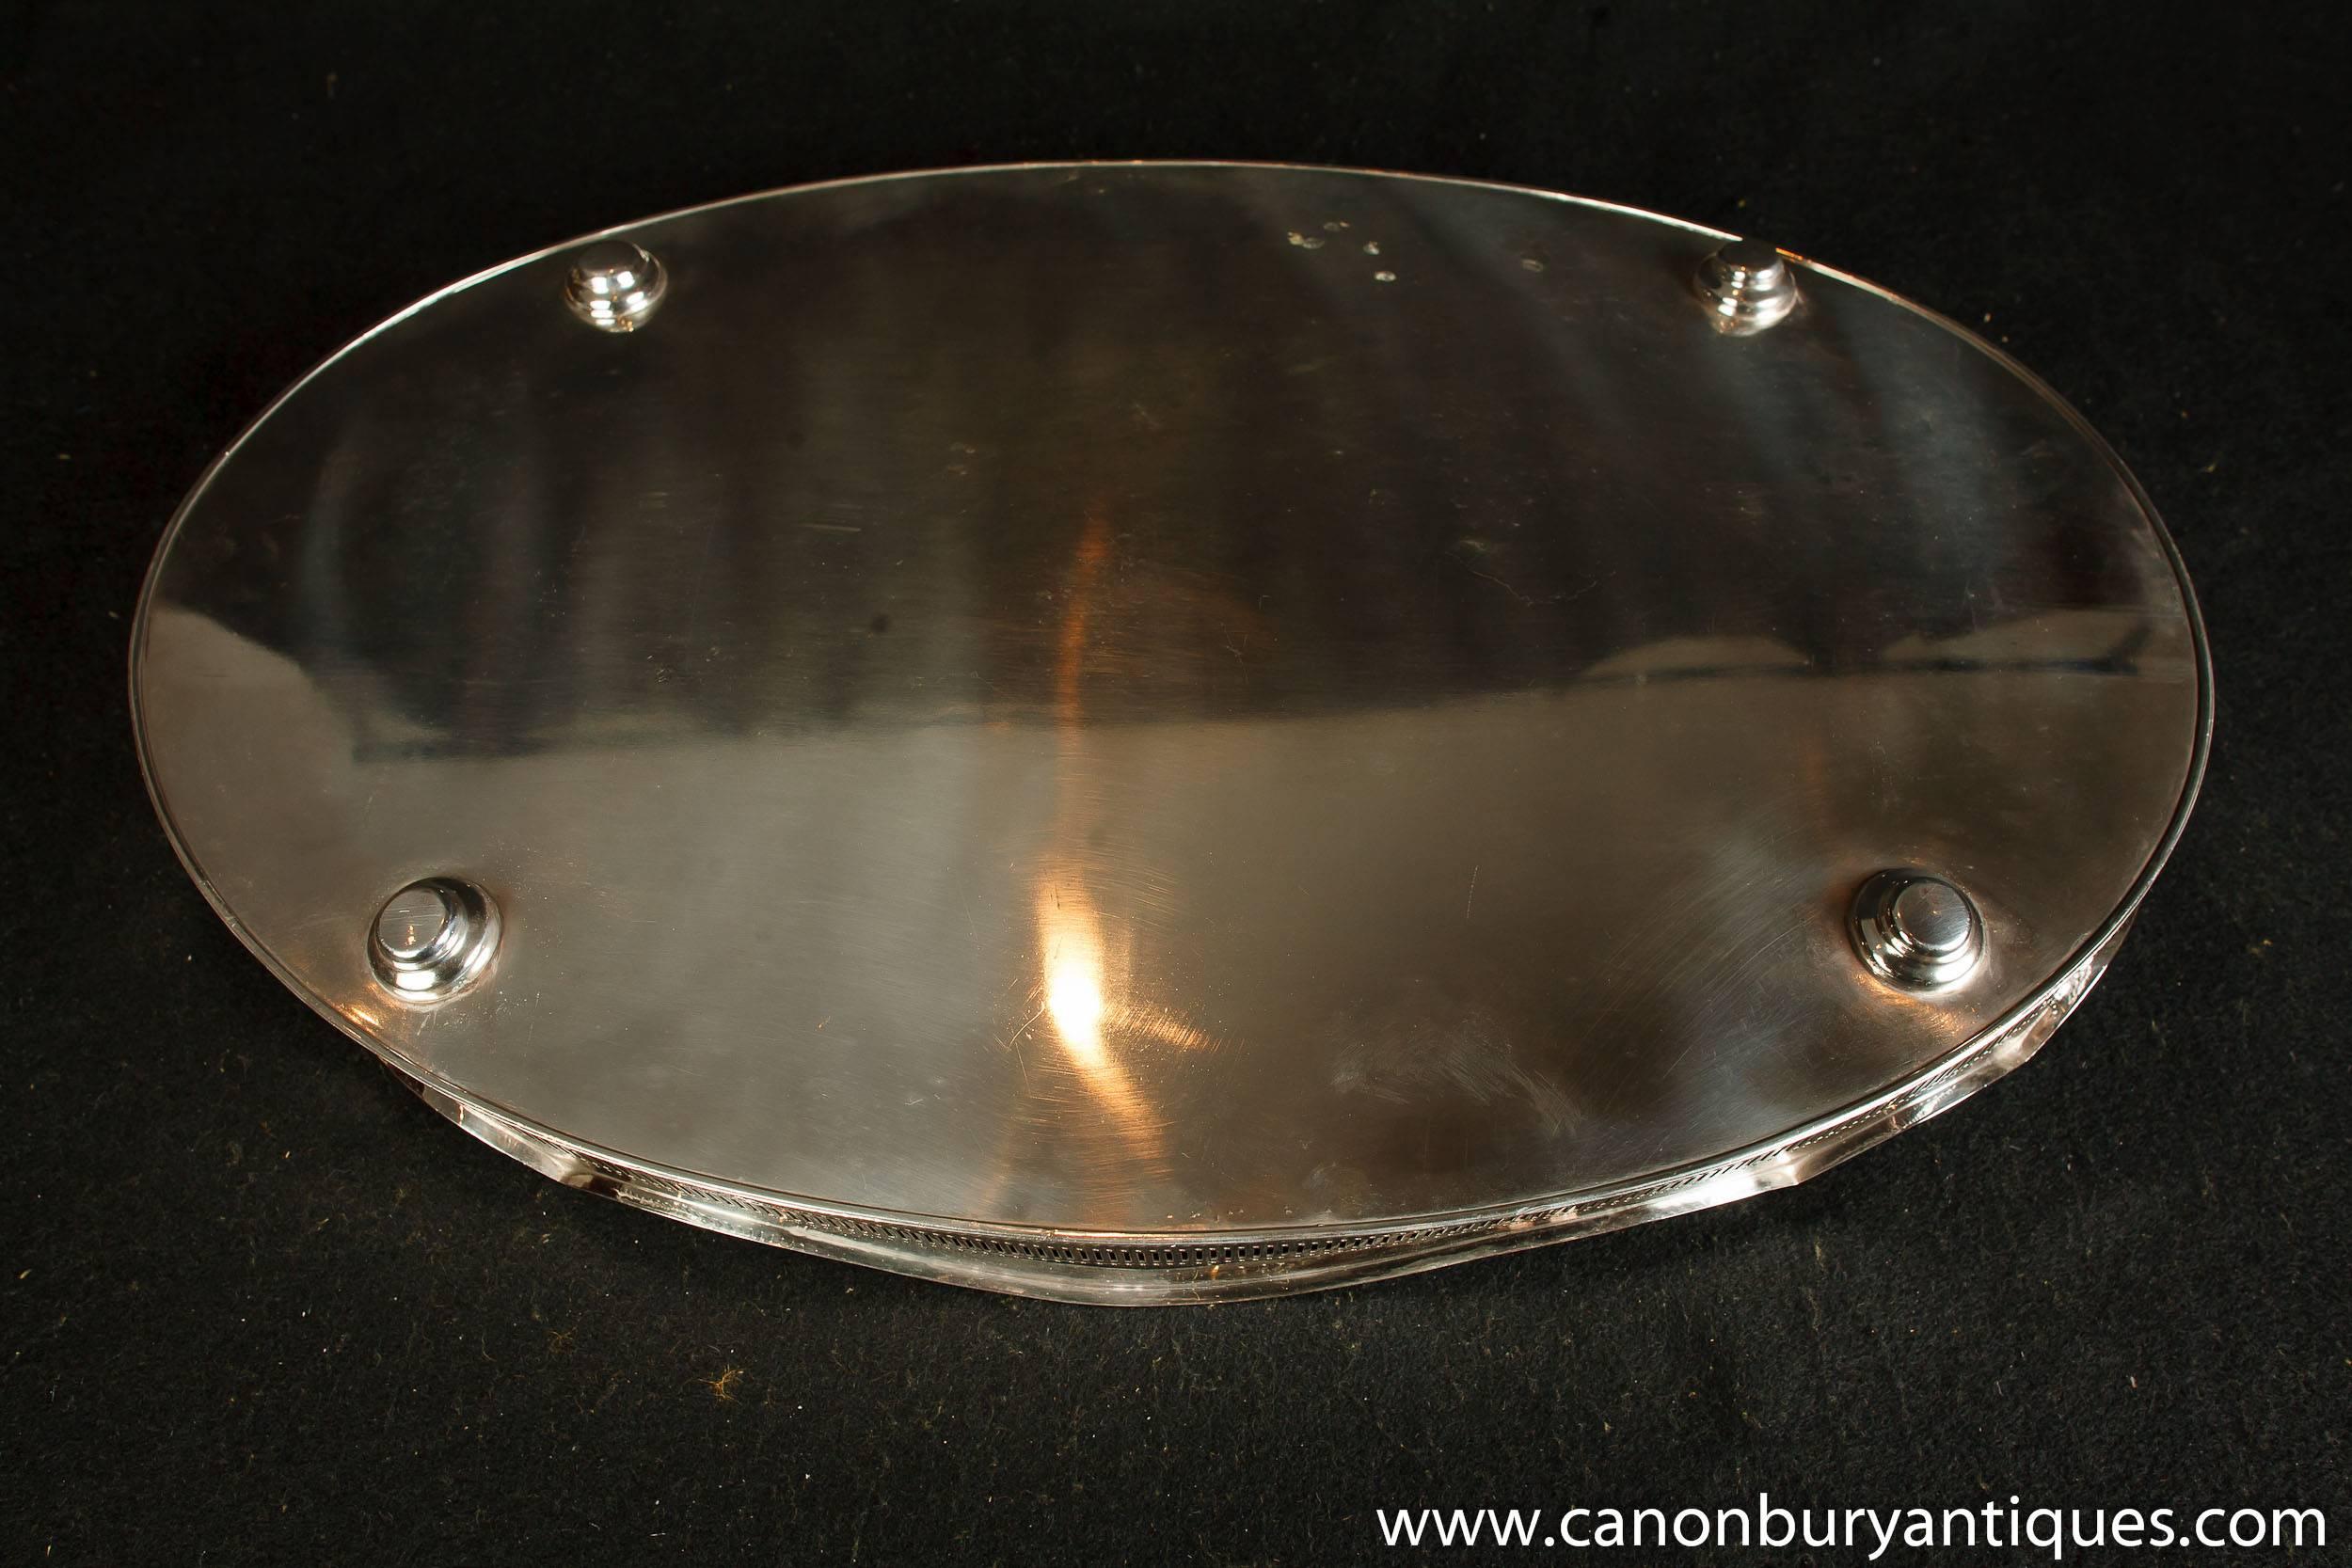 Stunning Victorian style silver plate tray.
Elegant oval shape with scalloped designs to gallery.
Piece finished in faux tortoiseshell.
Please see factory stamp on the underside - D.P and Sons.
Purchased from a dealer at the London silver